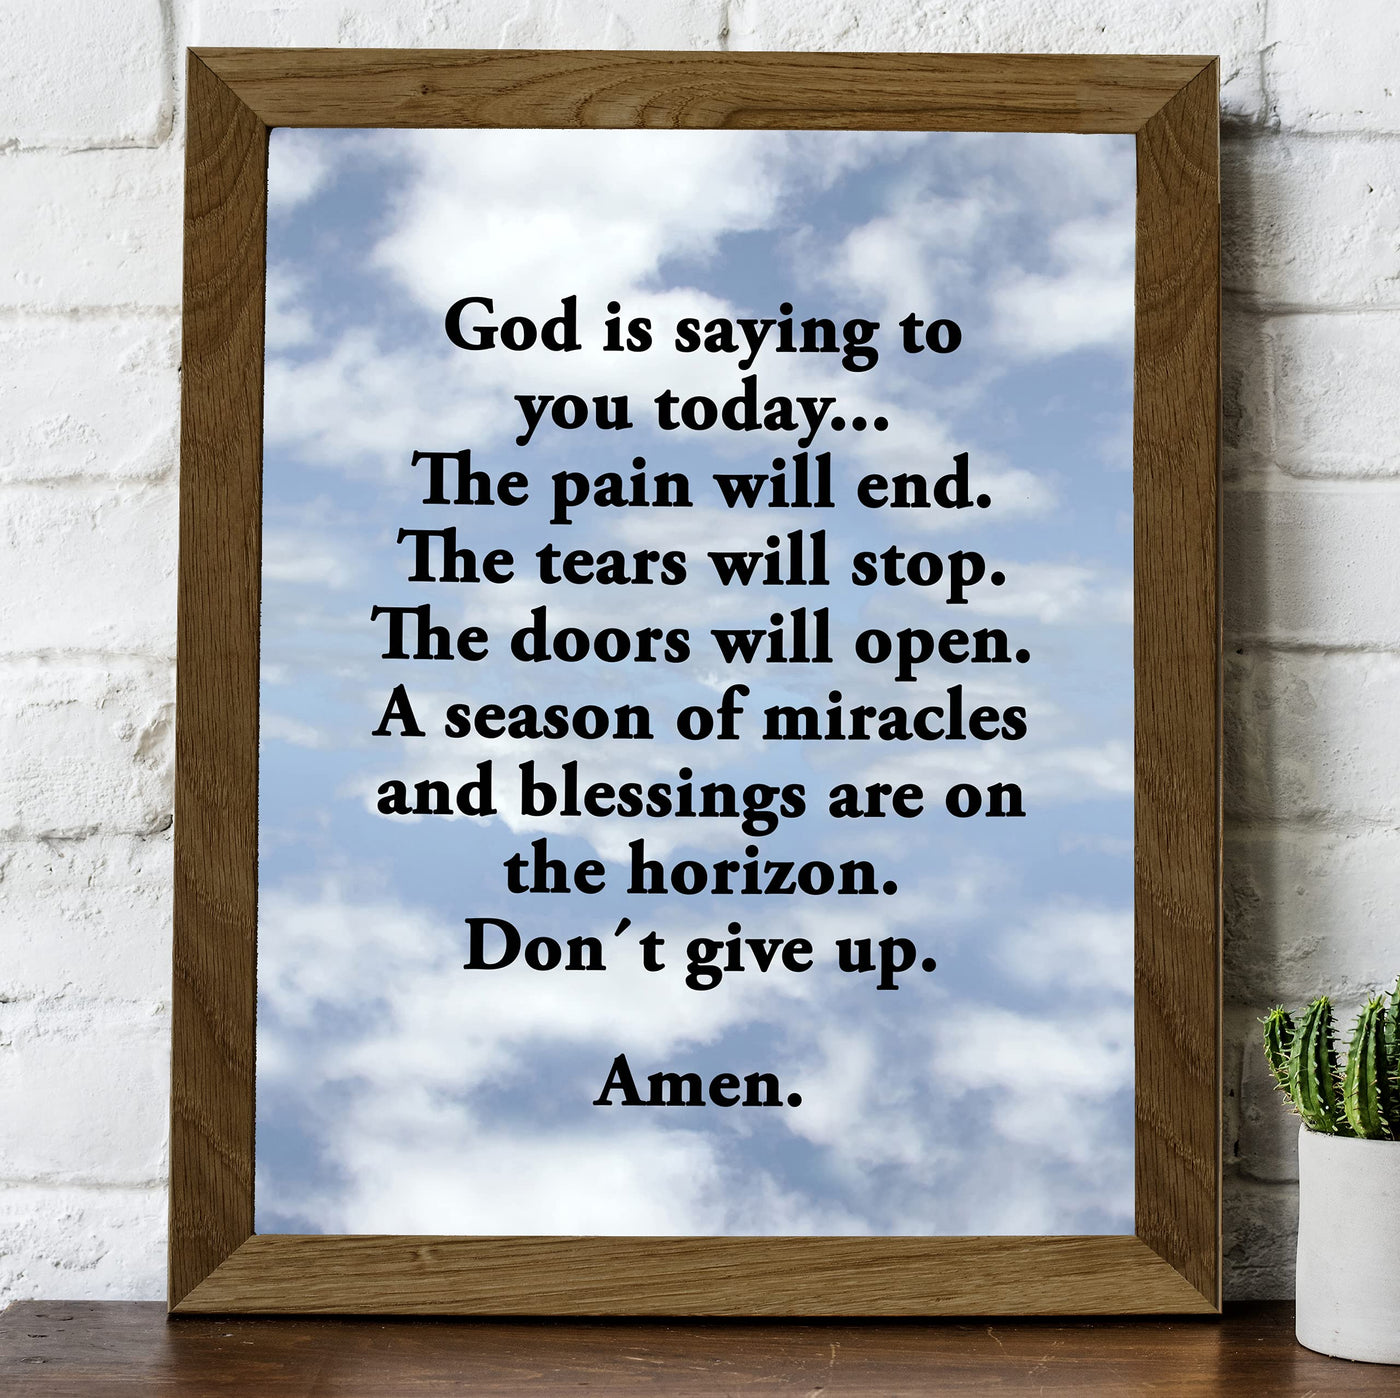 God Is Saying to You-Don't Give Up Inspirational Quotes Wall Decor-8 x 10" Christian Art Print-Ready to Frame. Motivational Home-Office-Religious-Church Decor. Great Gift of Faith & Inspiration!